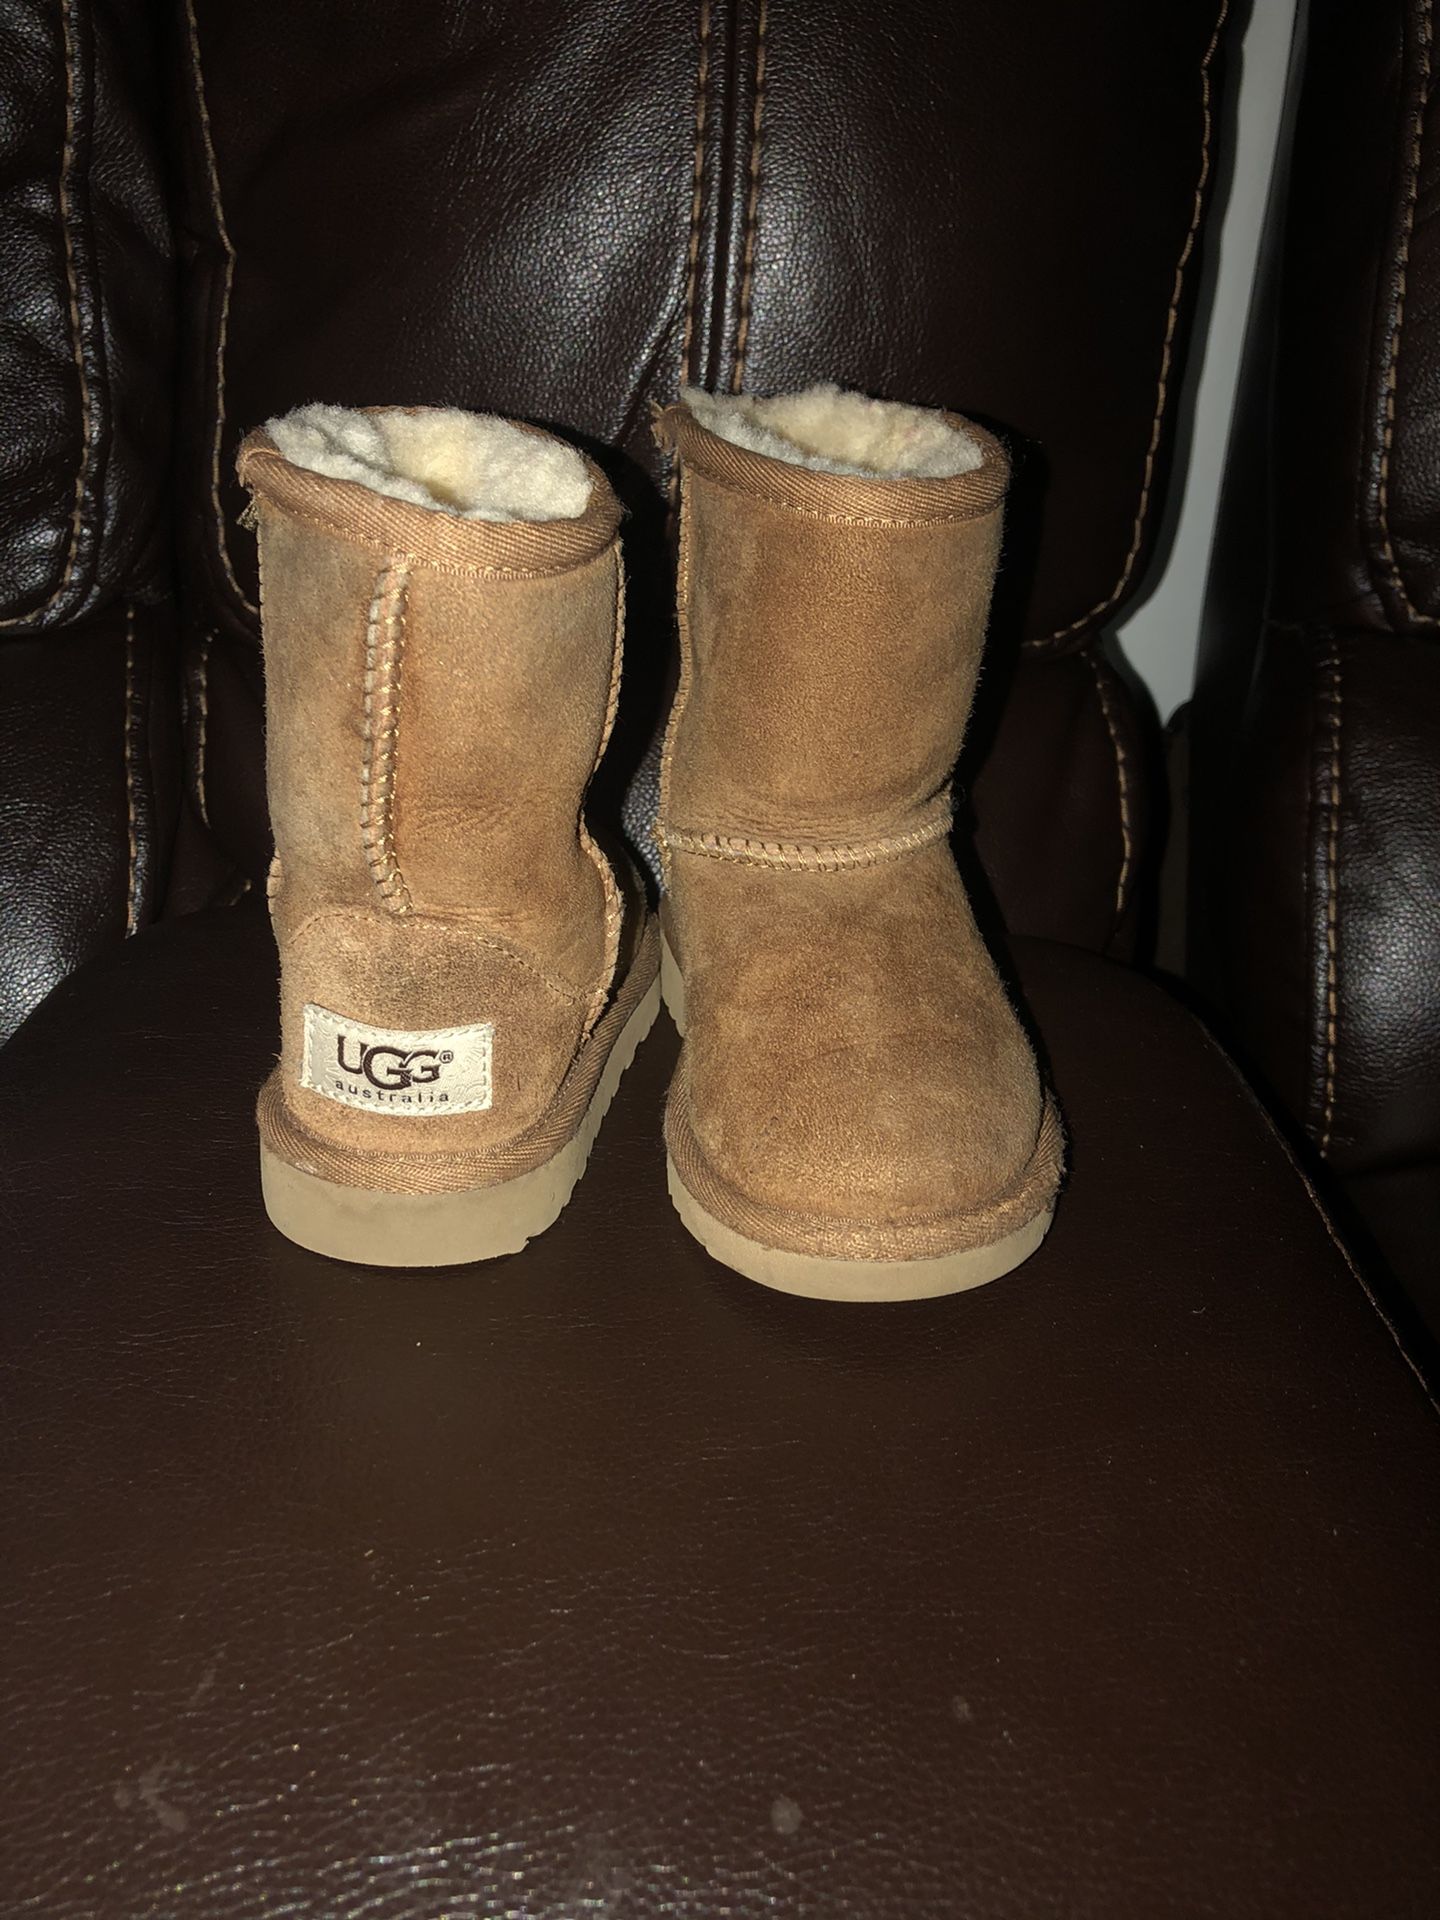 UGG Classic Boots (toddler size 8)